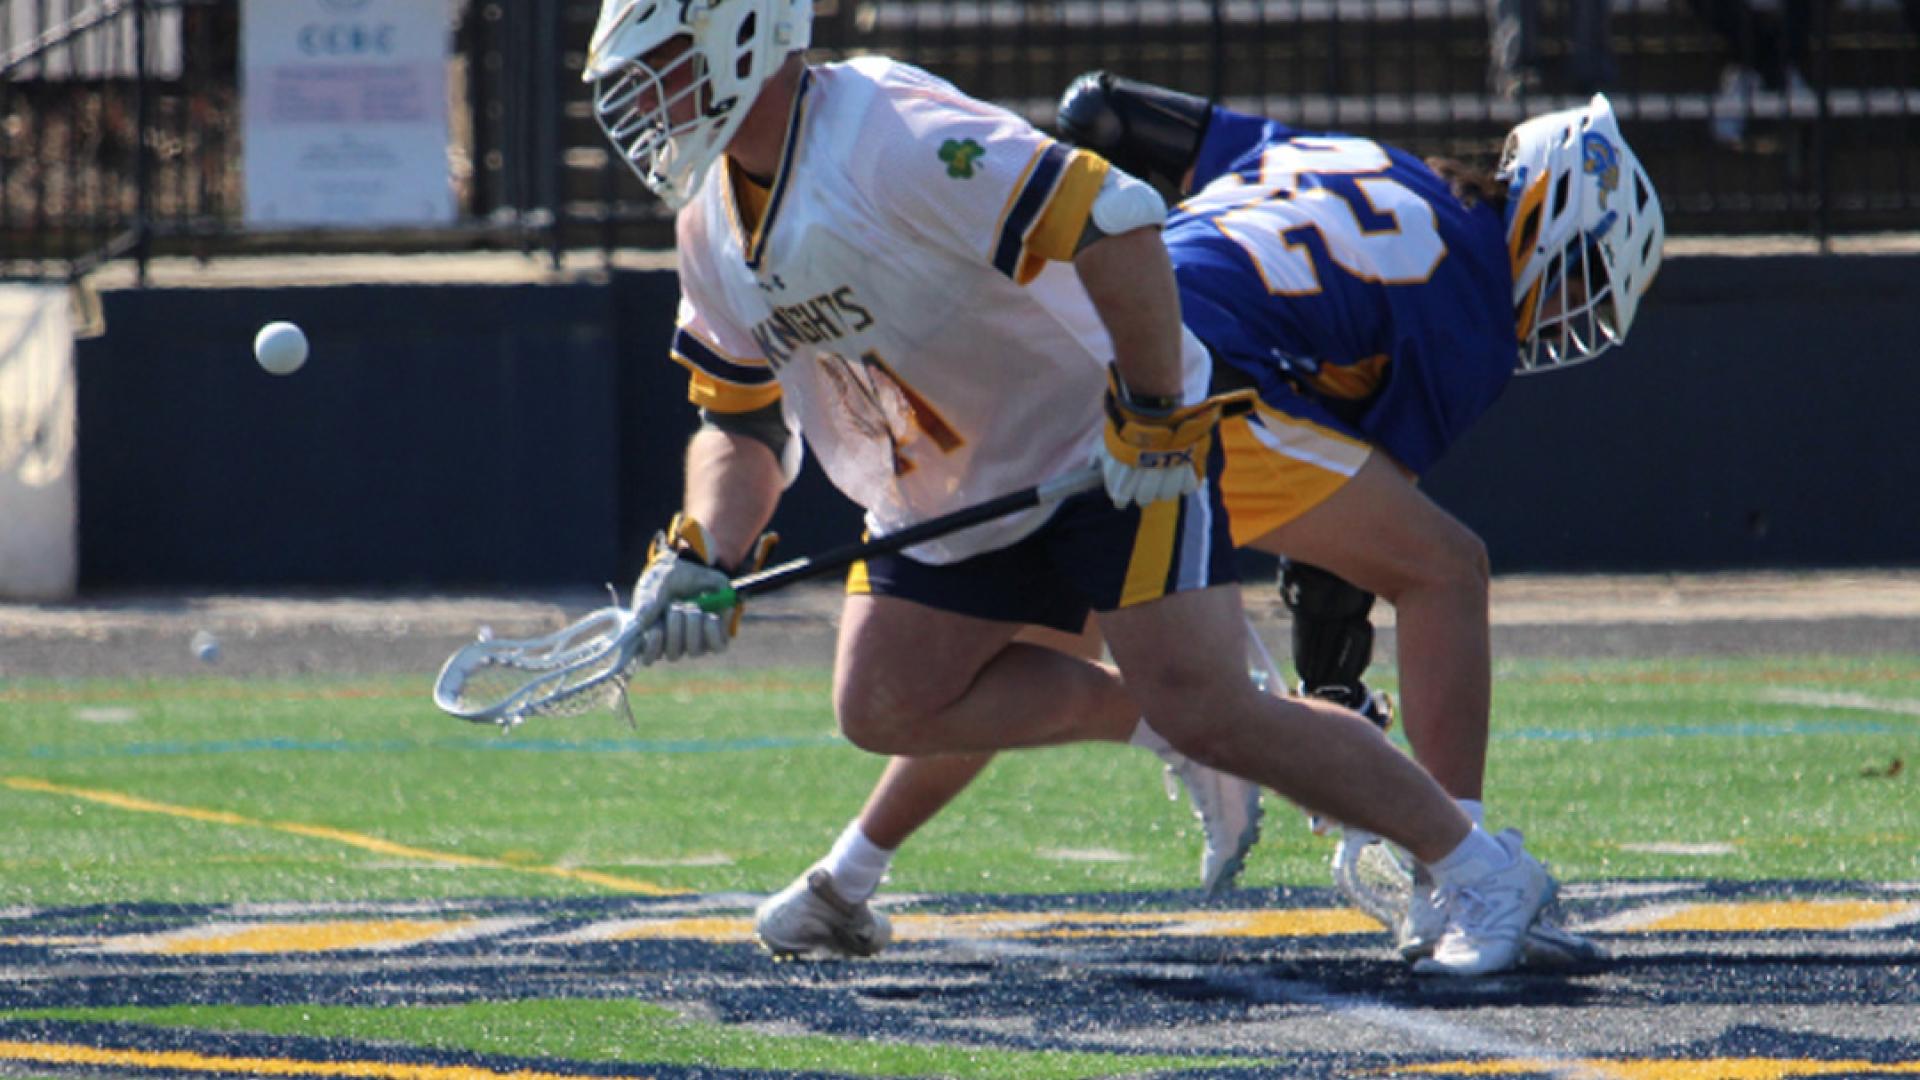 Ccbc Essex Up To No 4 In Final Njcaa Mens Lacrosse Top 5 Usa Lacrosse 